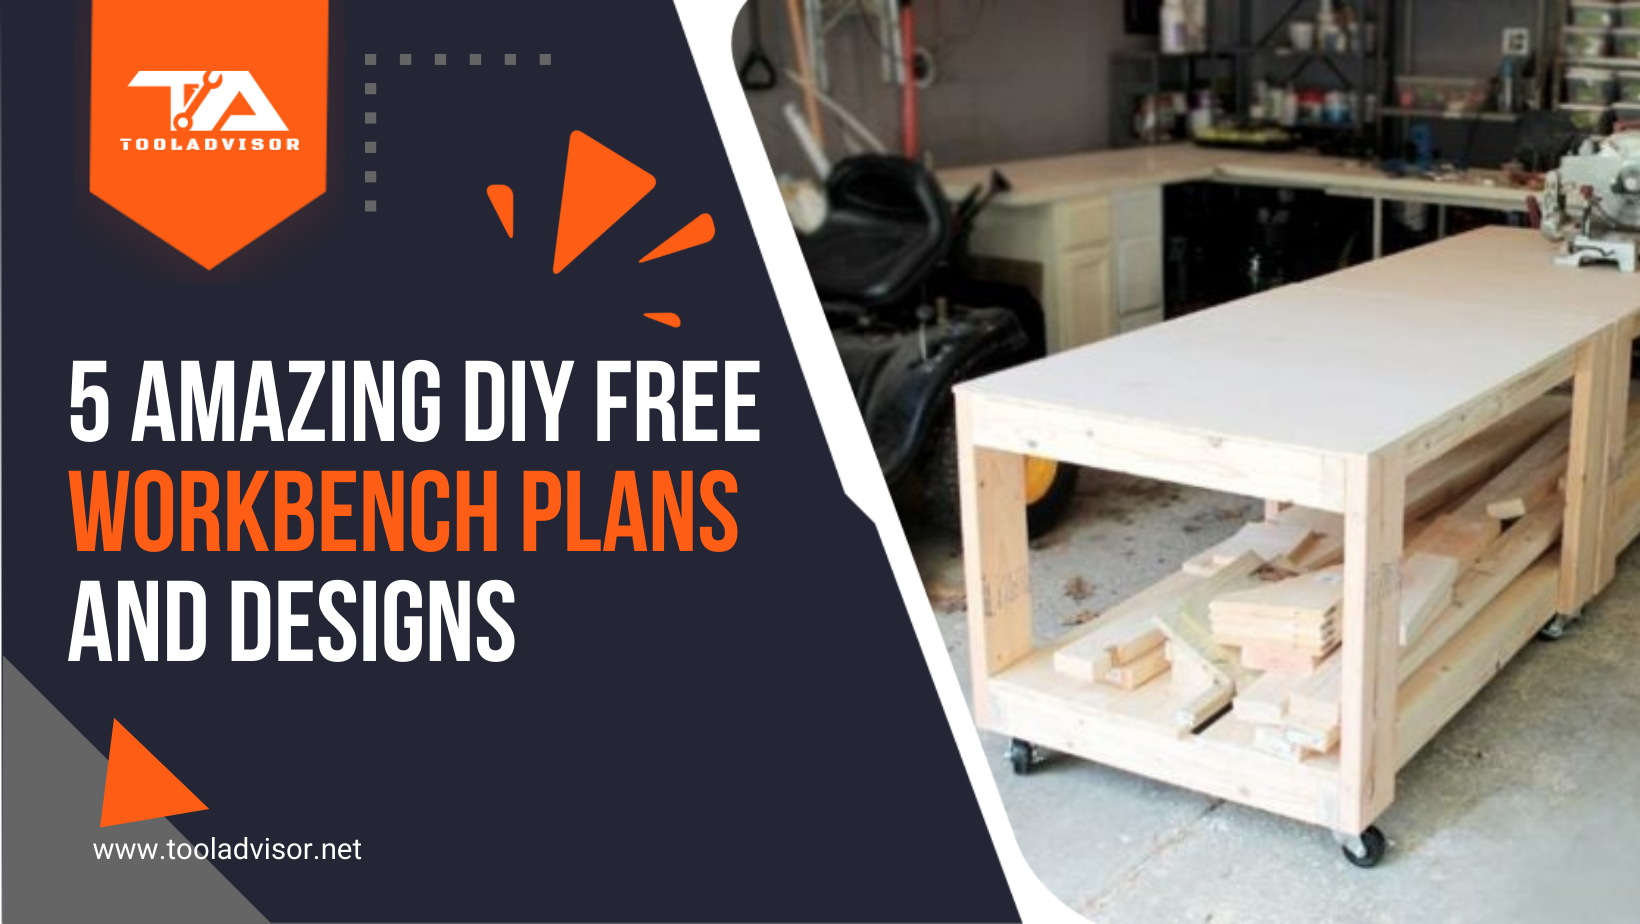 5 Amazing DIY Free Workbench Plans and Designs